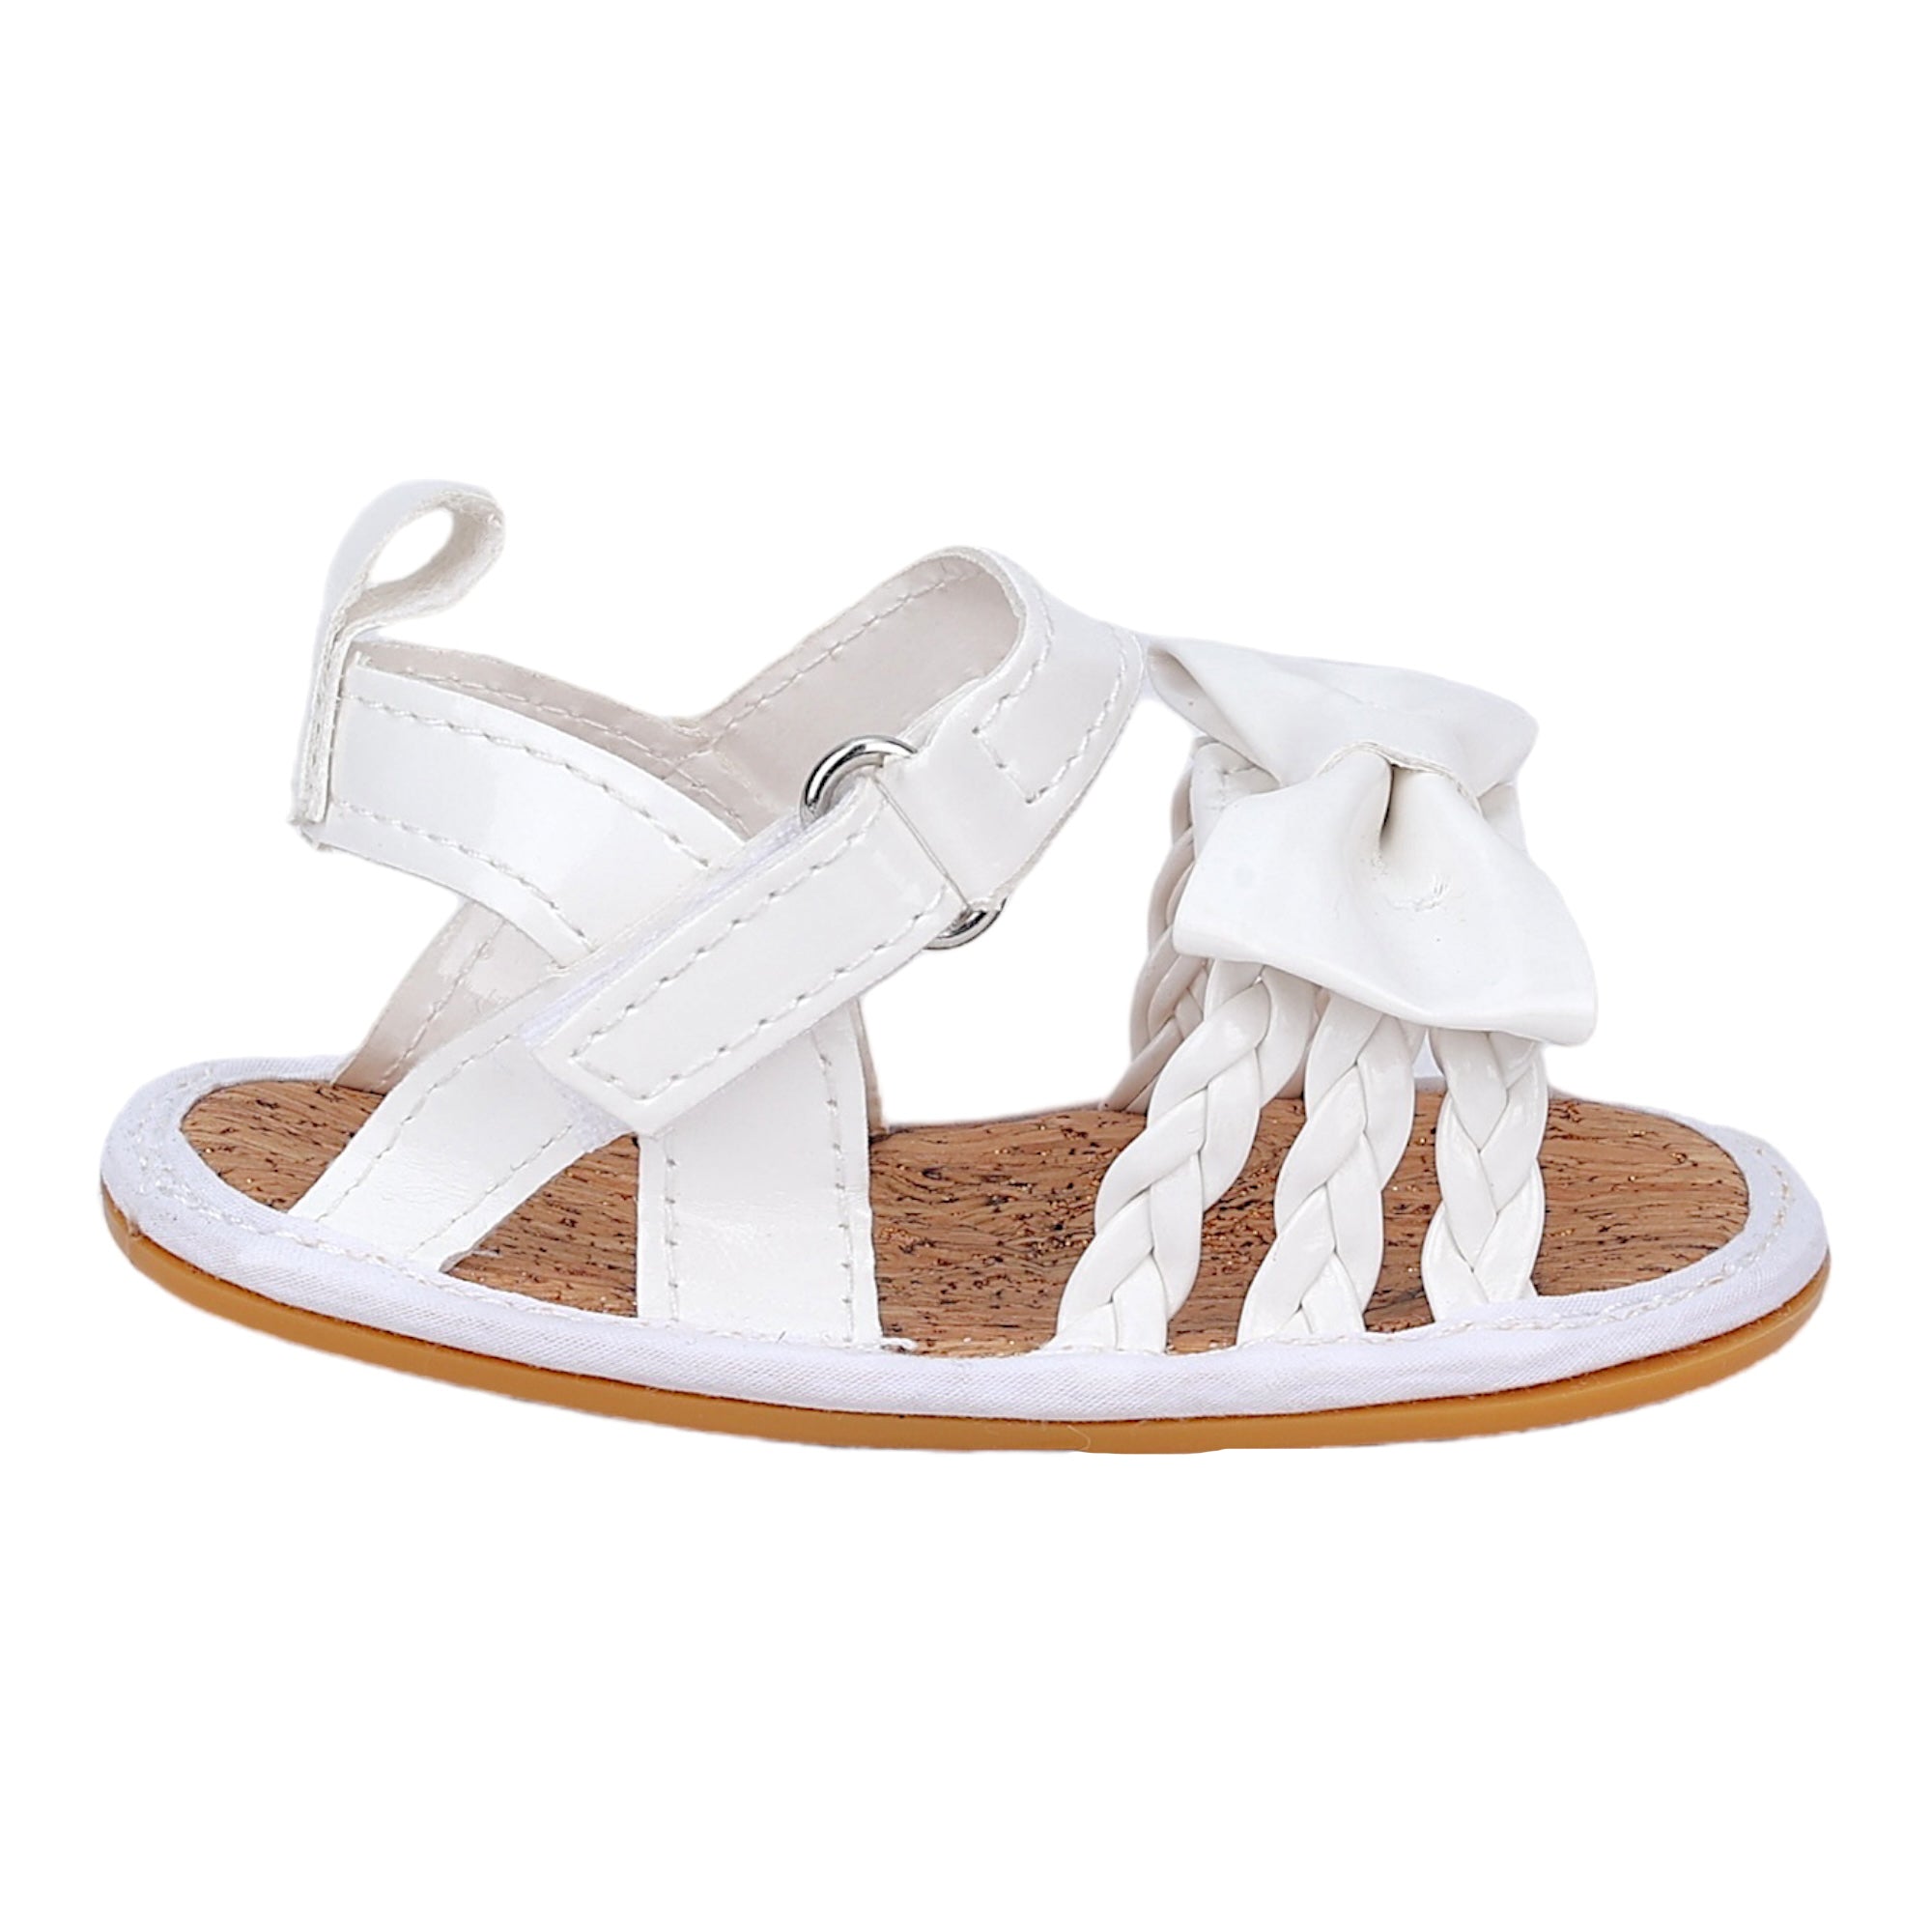 Baby Moo Partywear Patent Leather Bow Velcro Strap Anti-Skid Sandals - White